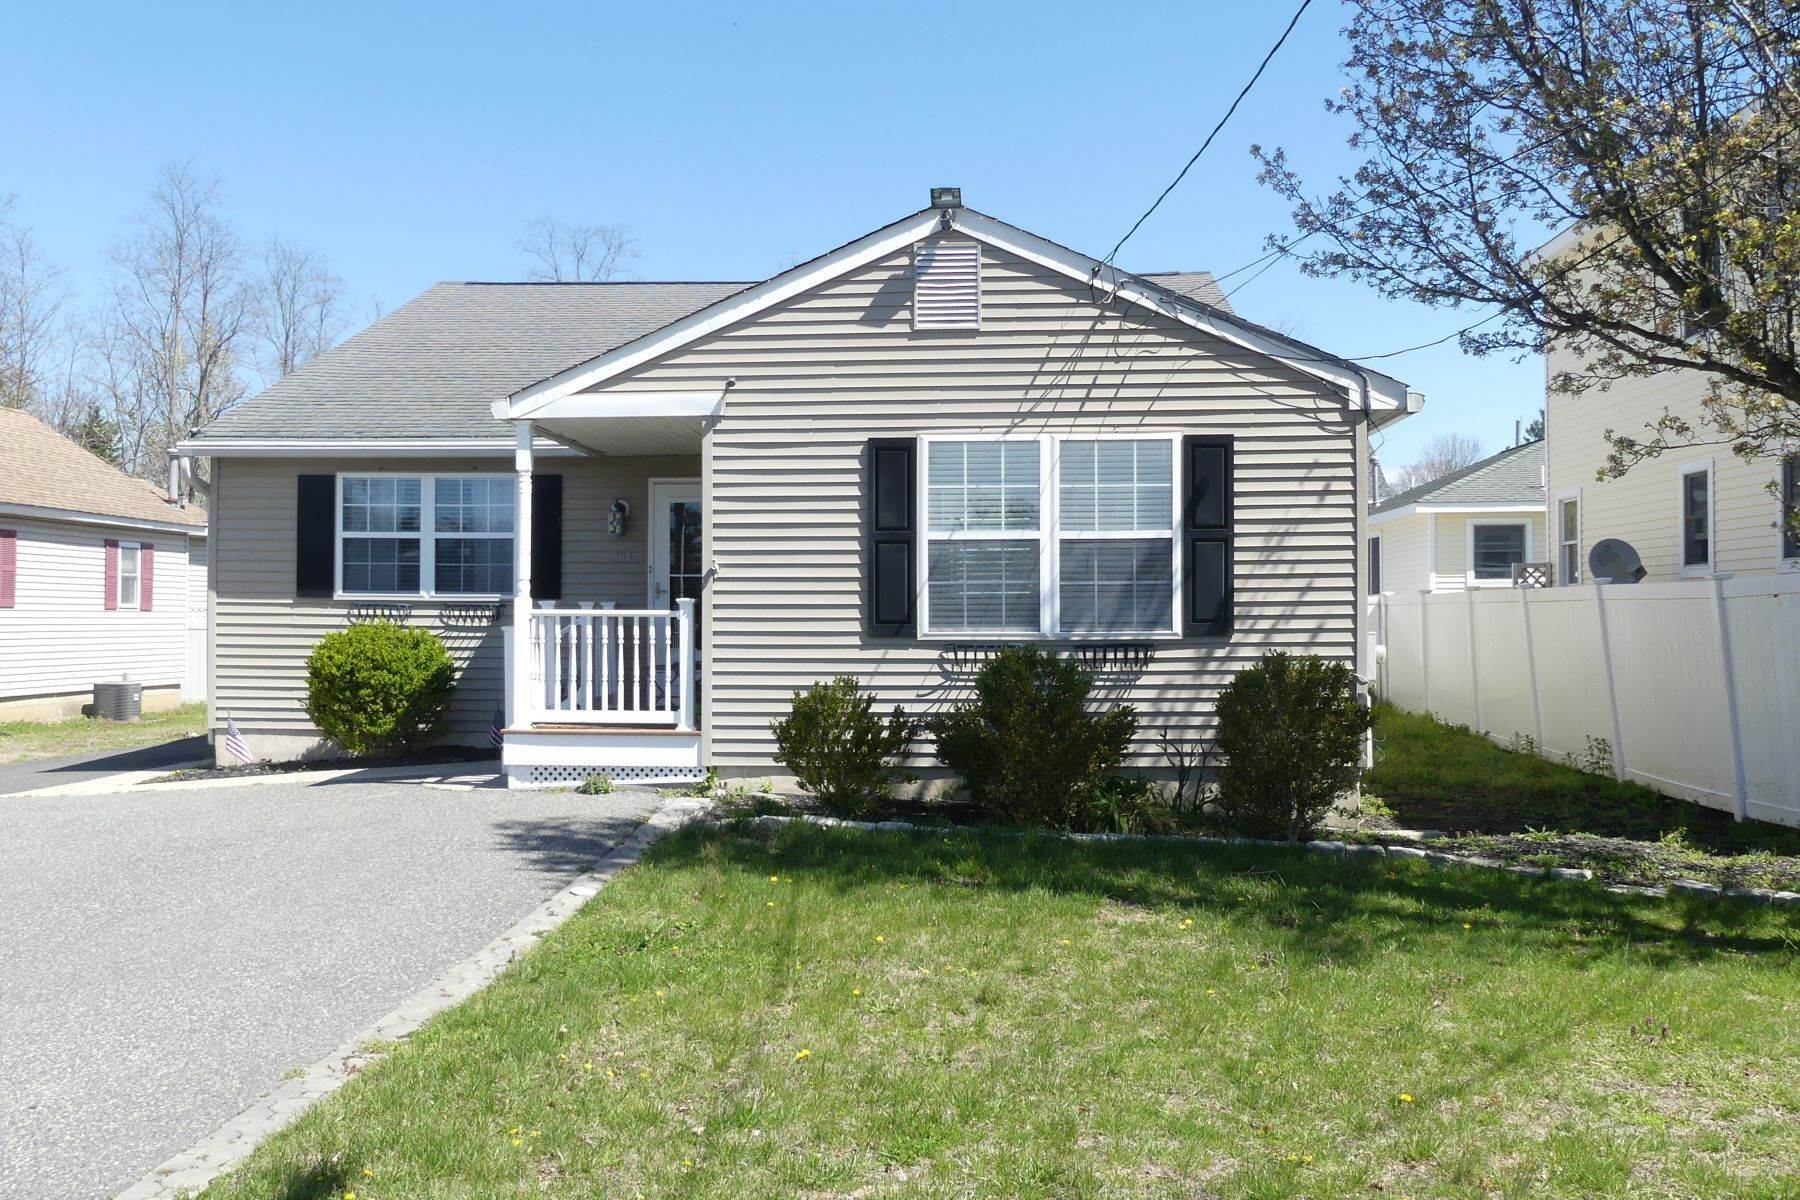 Property for Sale at 104 W Pacific Avenue Cape May Court House, New Jersey 08210 United States